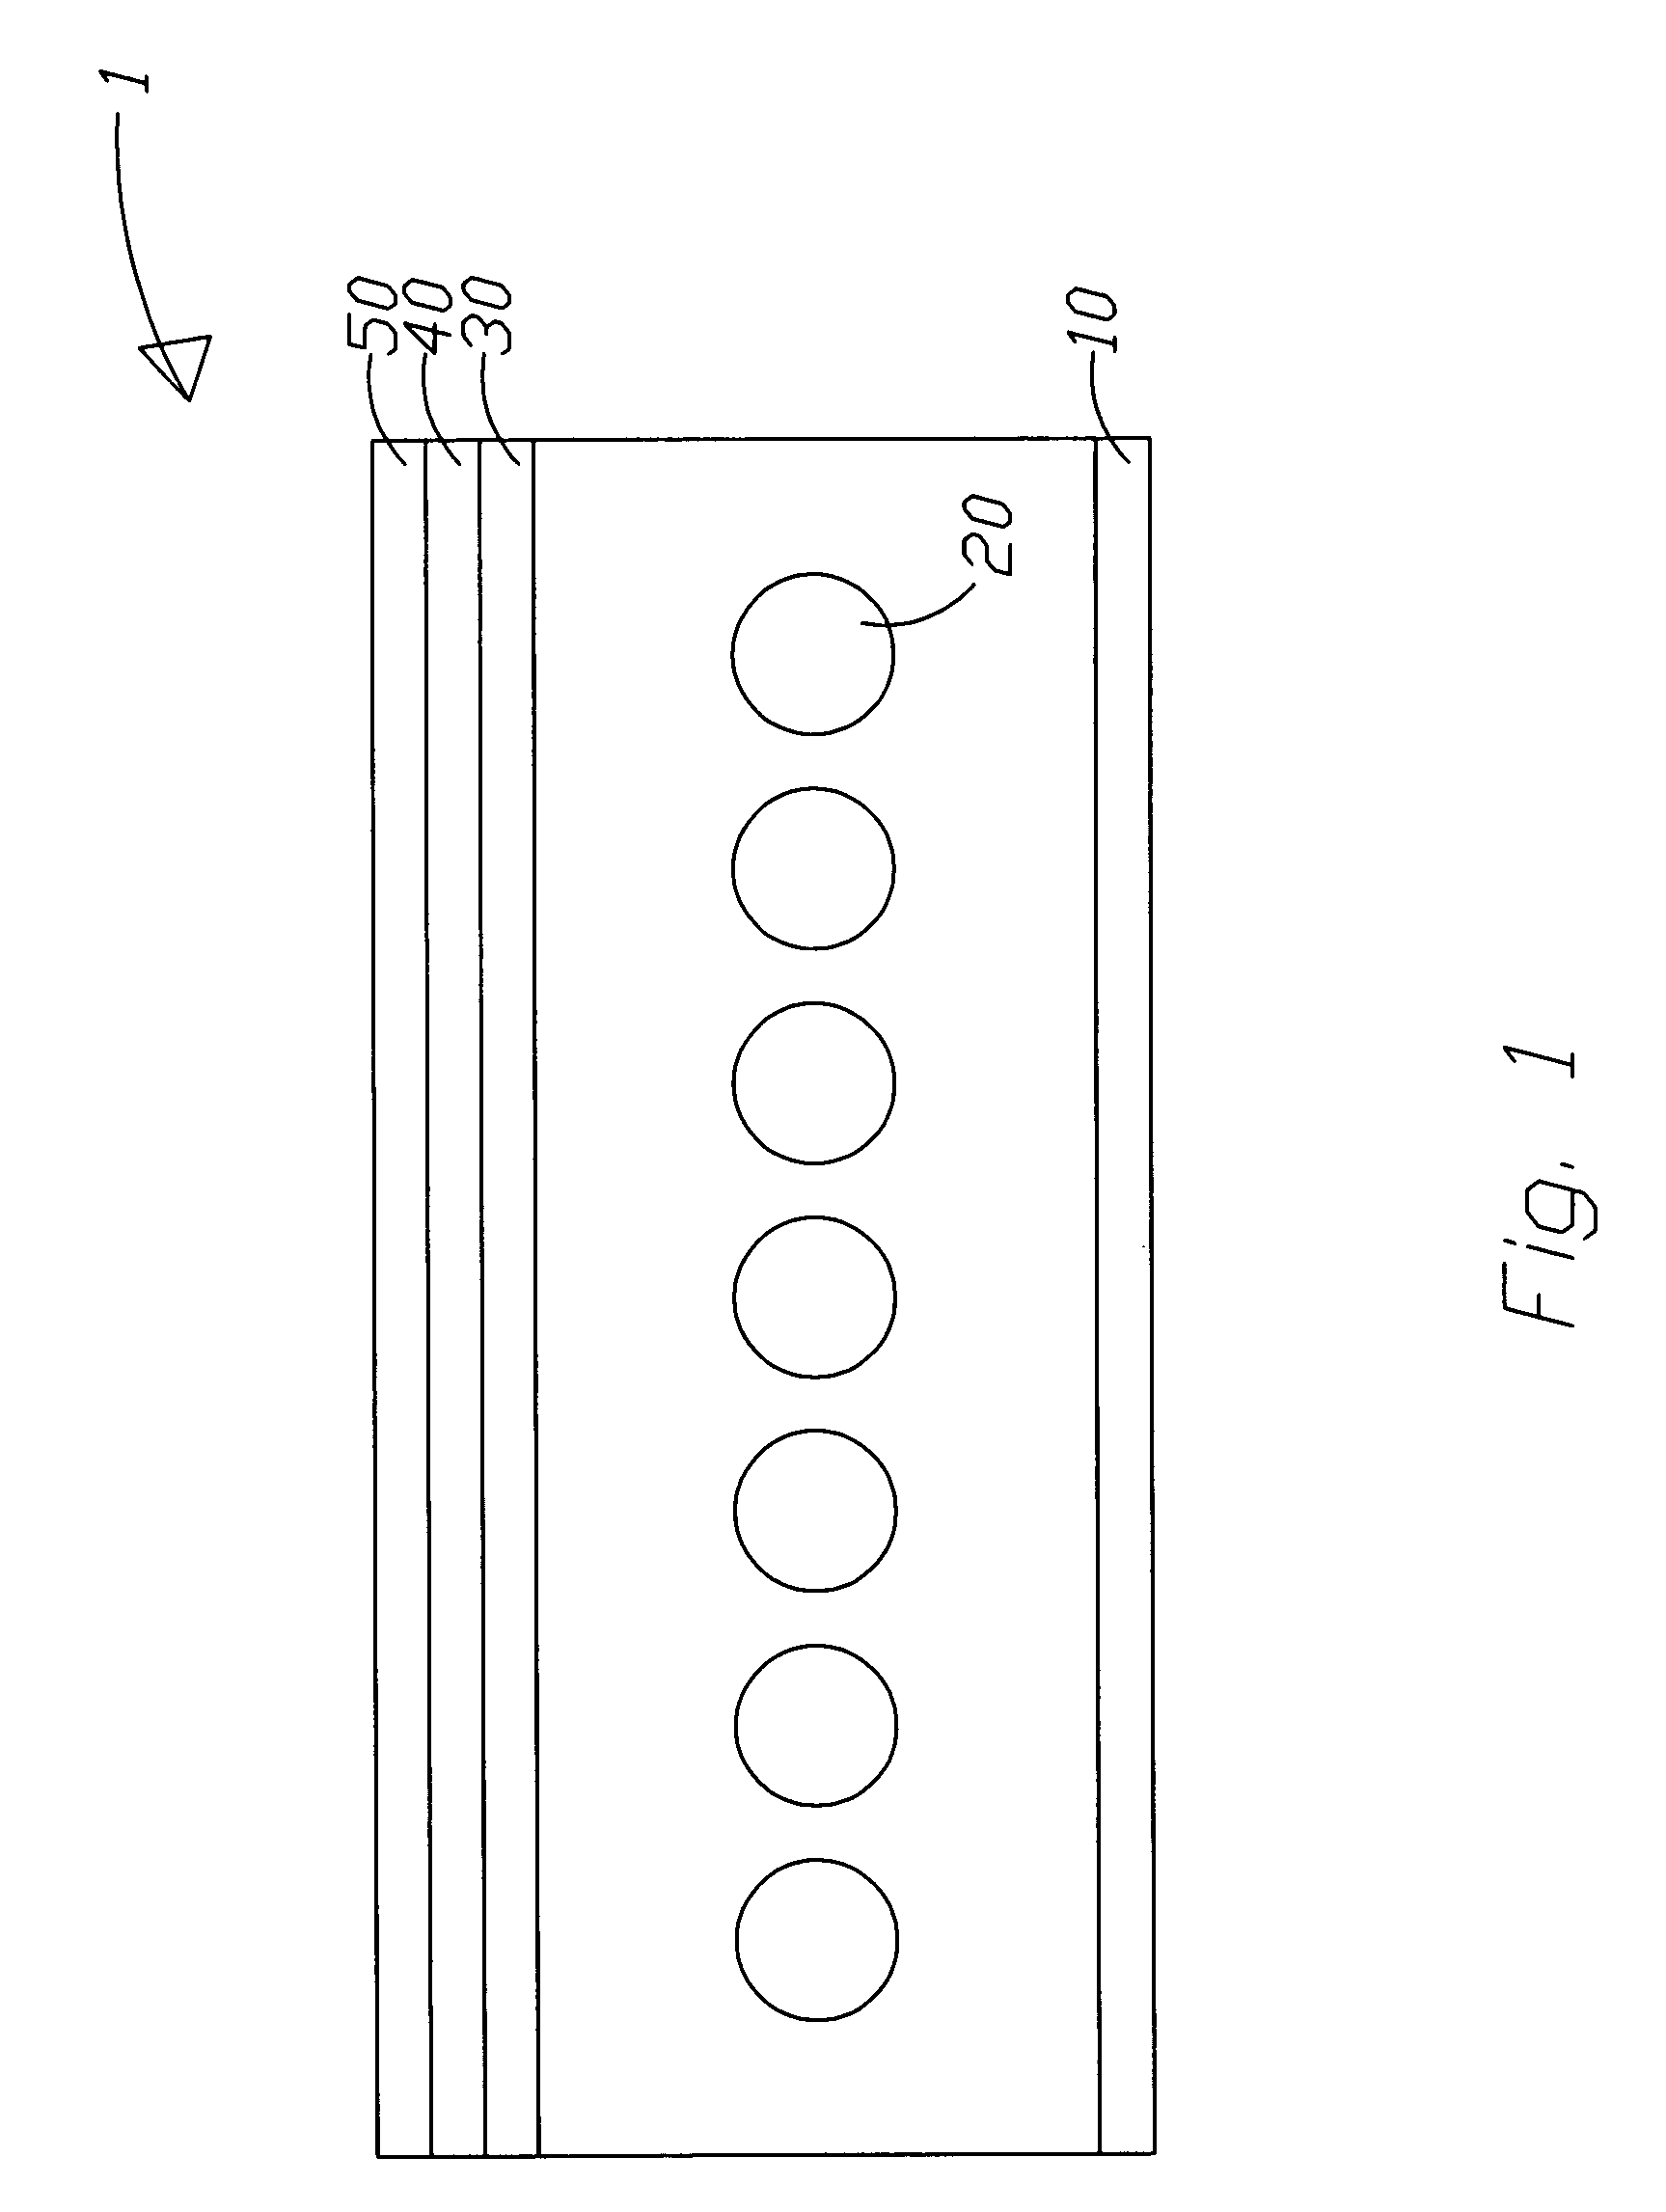 Structure of direct type backlight module with high uniform emitting light